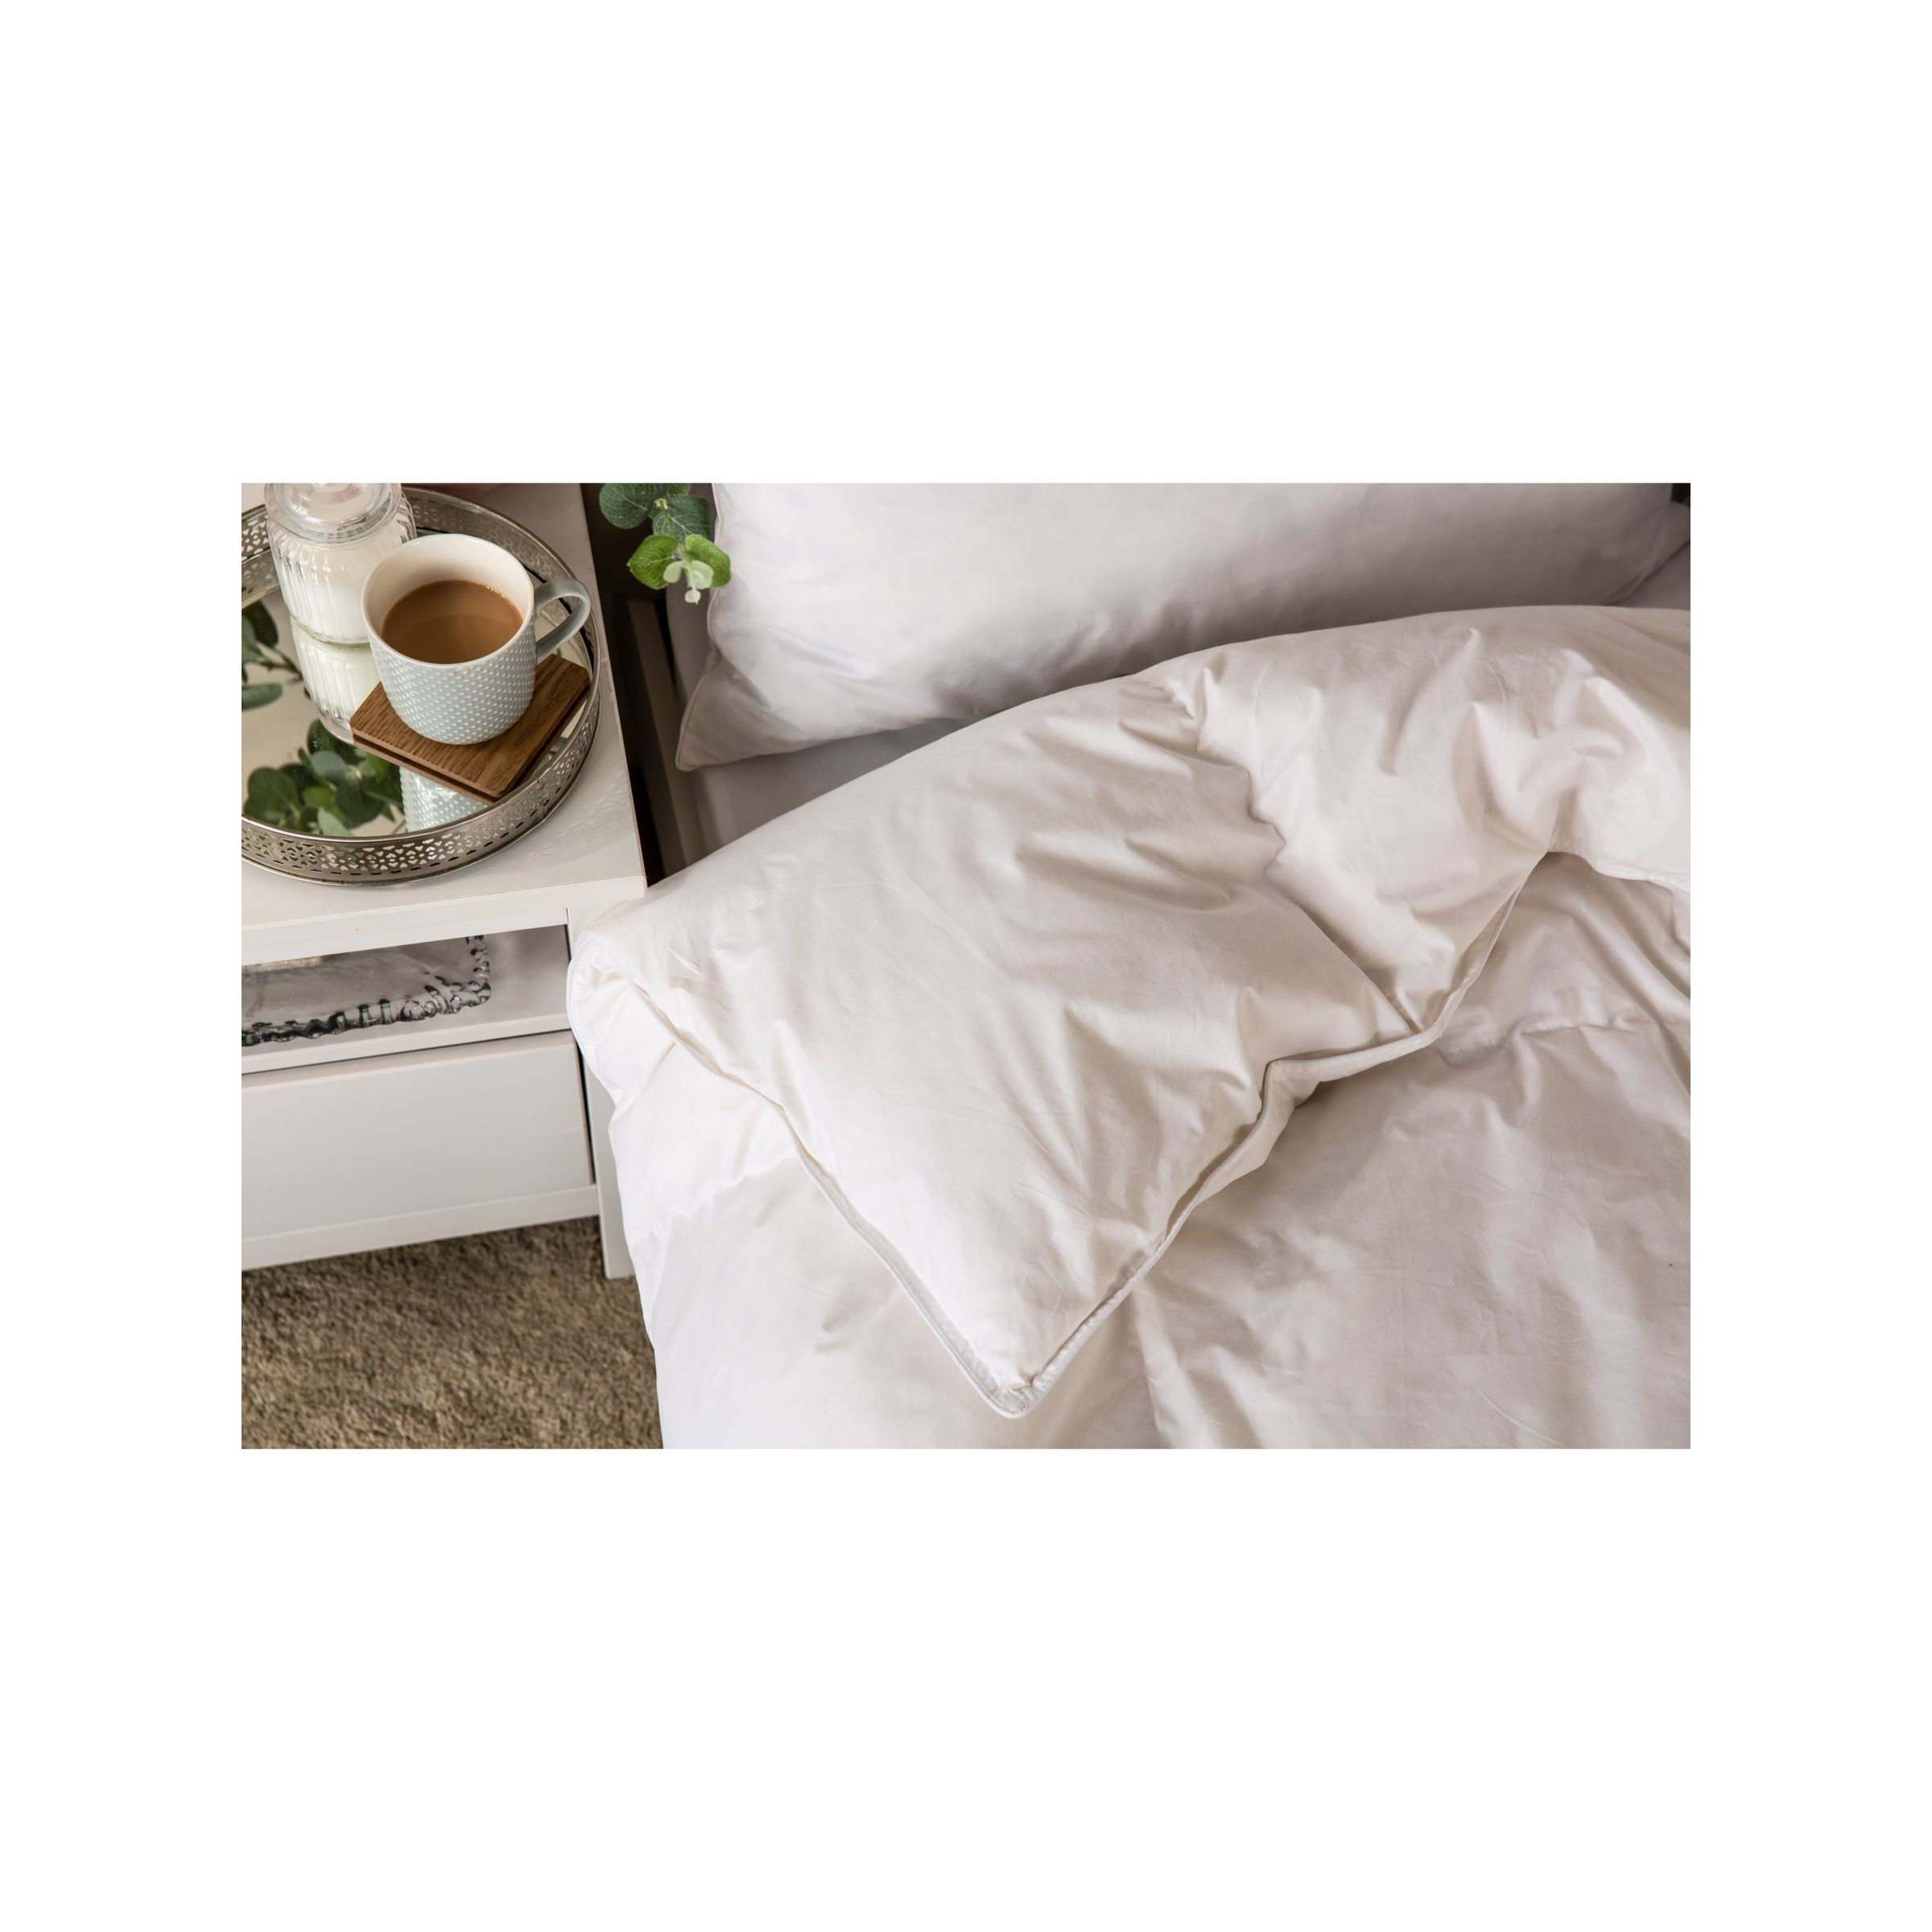 Snuggledown Natural Duck Feather and Down 3-in-1 Duvet, 13.5 Tog (4.5 + 9 Tog) - image 1